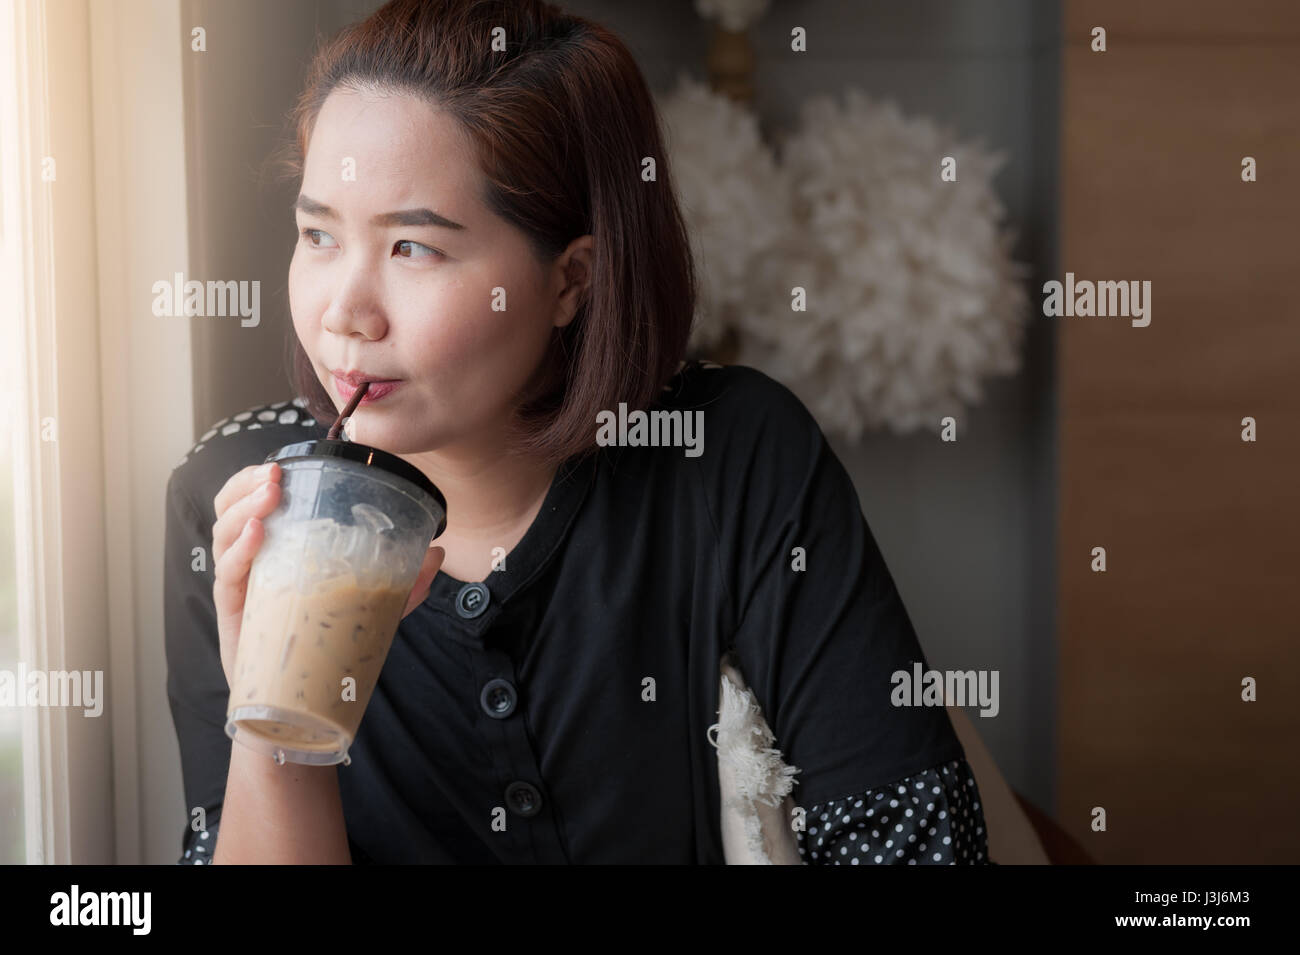 Young Asian woman drinking iced latte coffee beside window in cafe with good feeling. Weekend lifestyle abstract concept Stock Photo